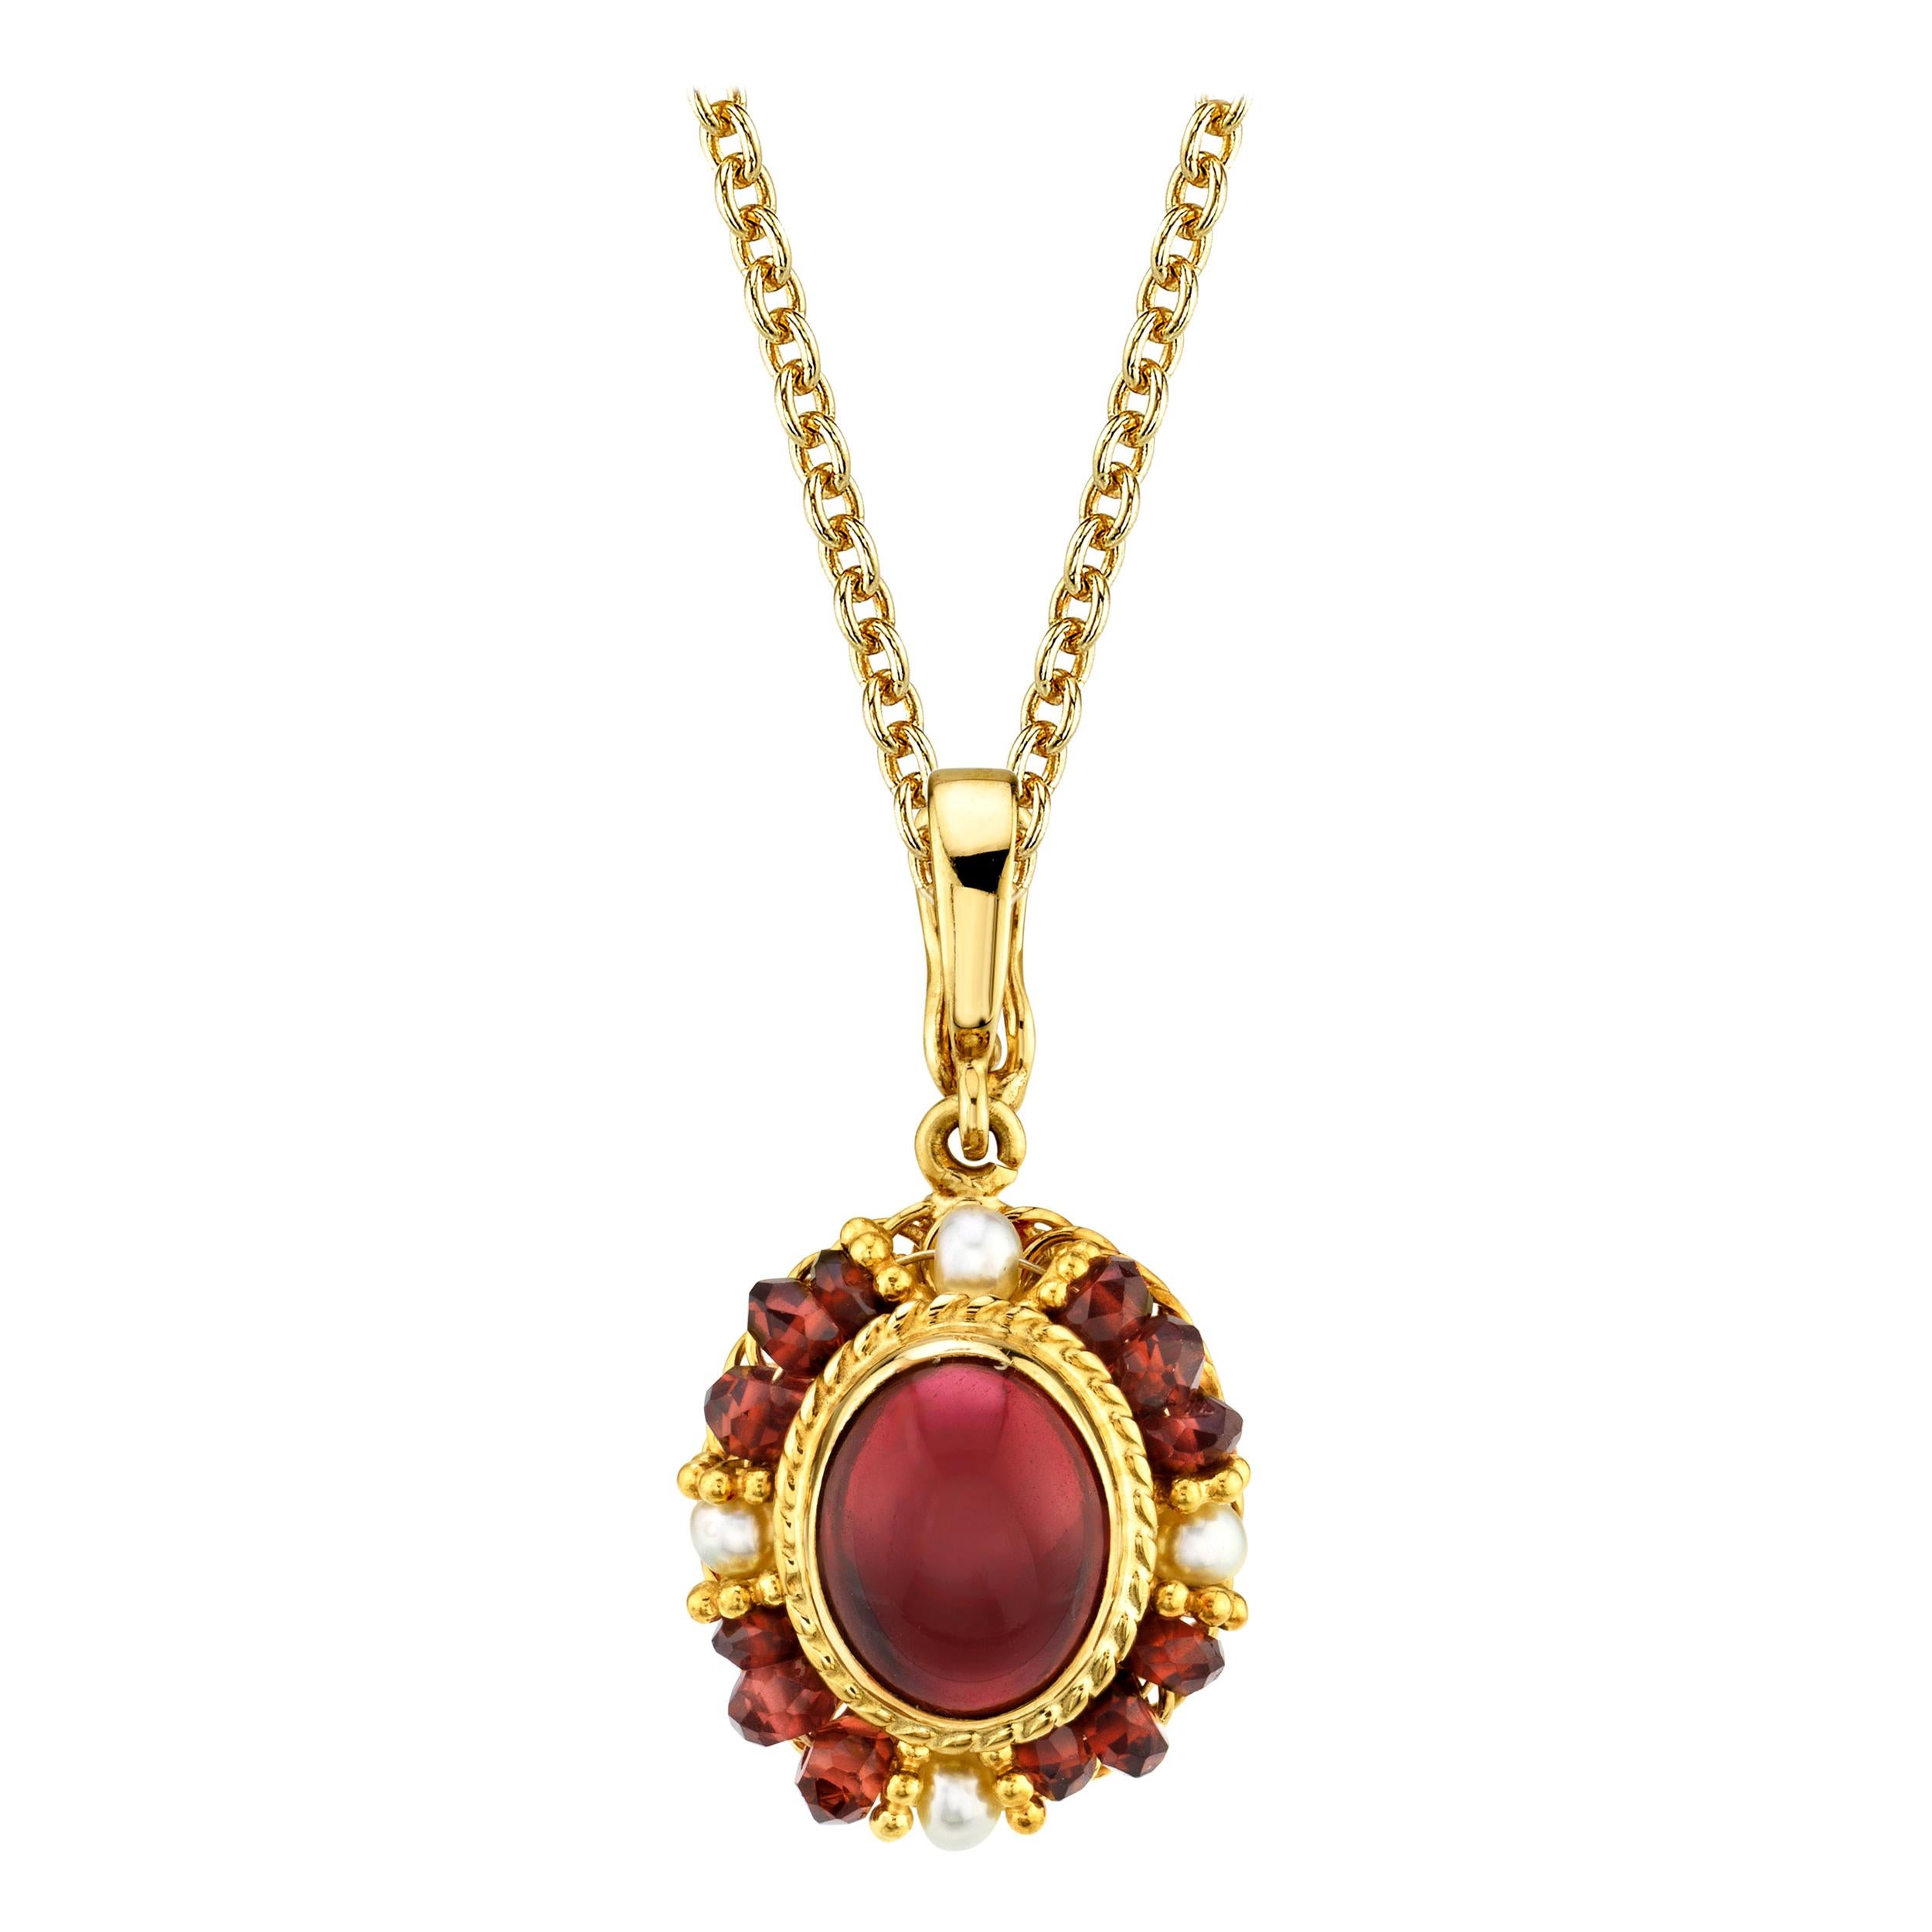 2.74 Carat Garnet Cabochon, Garnet Bead and Seed Pearl Filigree Necklace For Sale